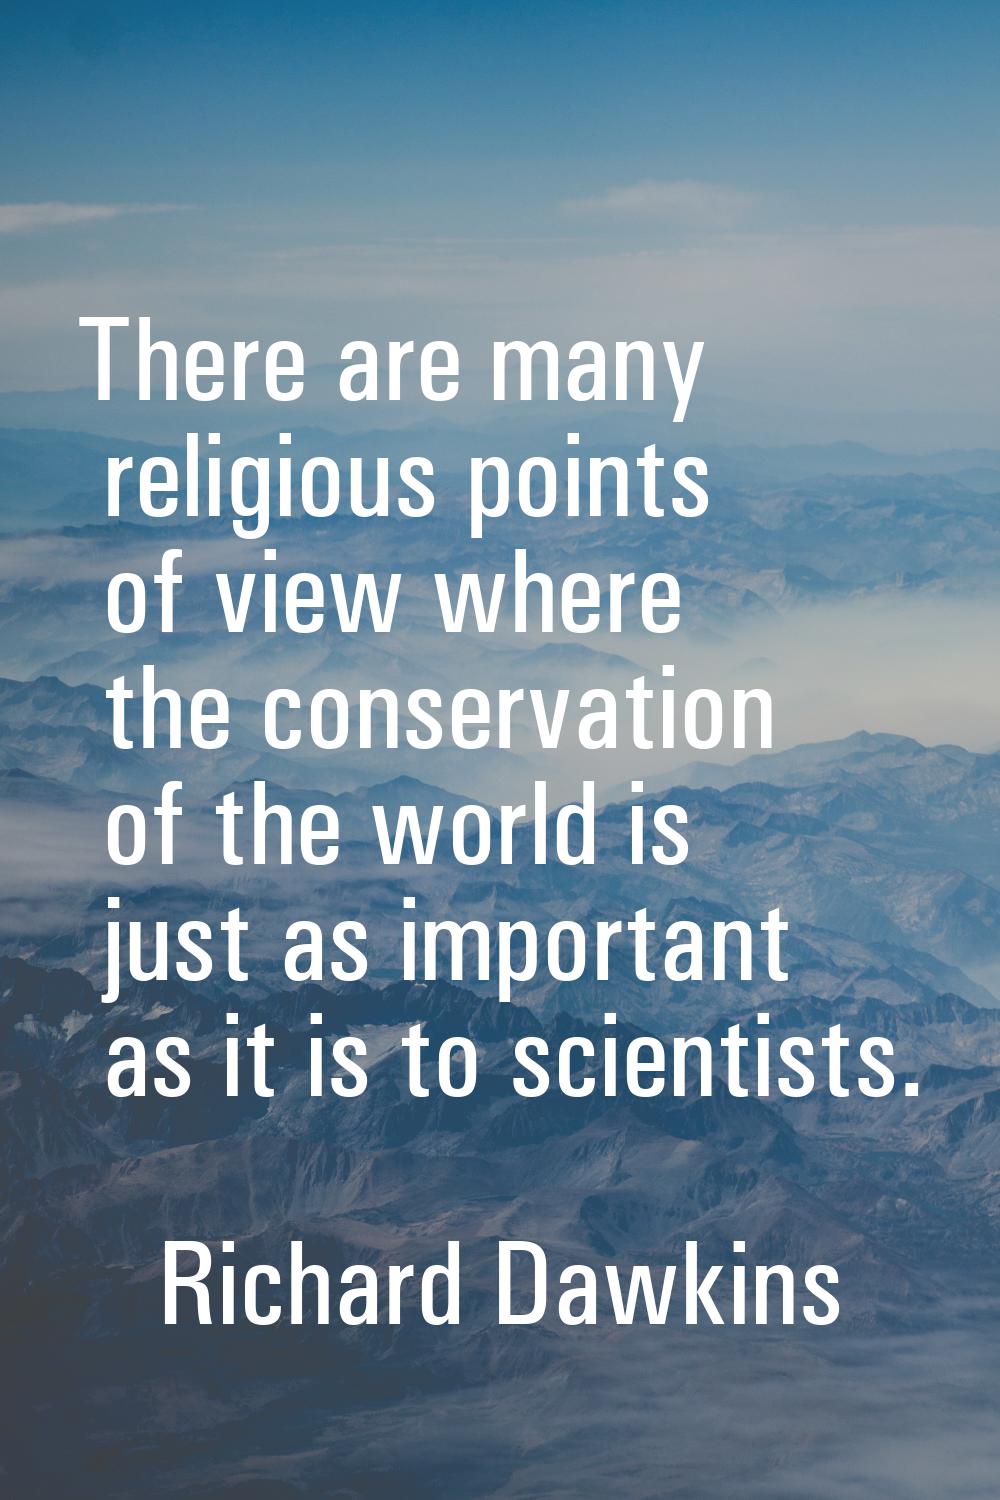 There are many religious points of view where the conservation of the world is just as important as